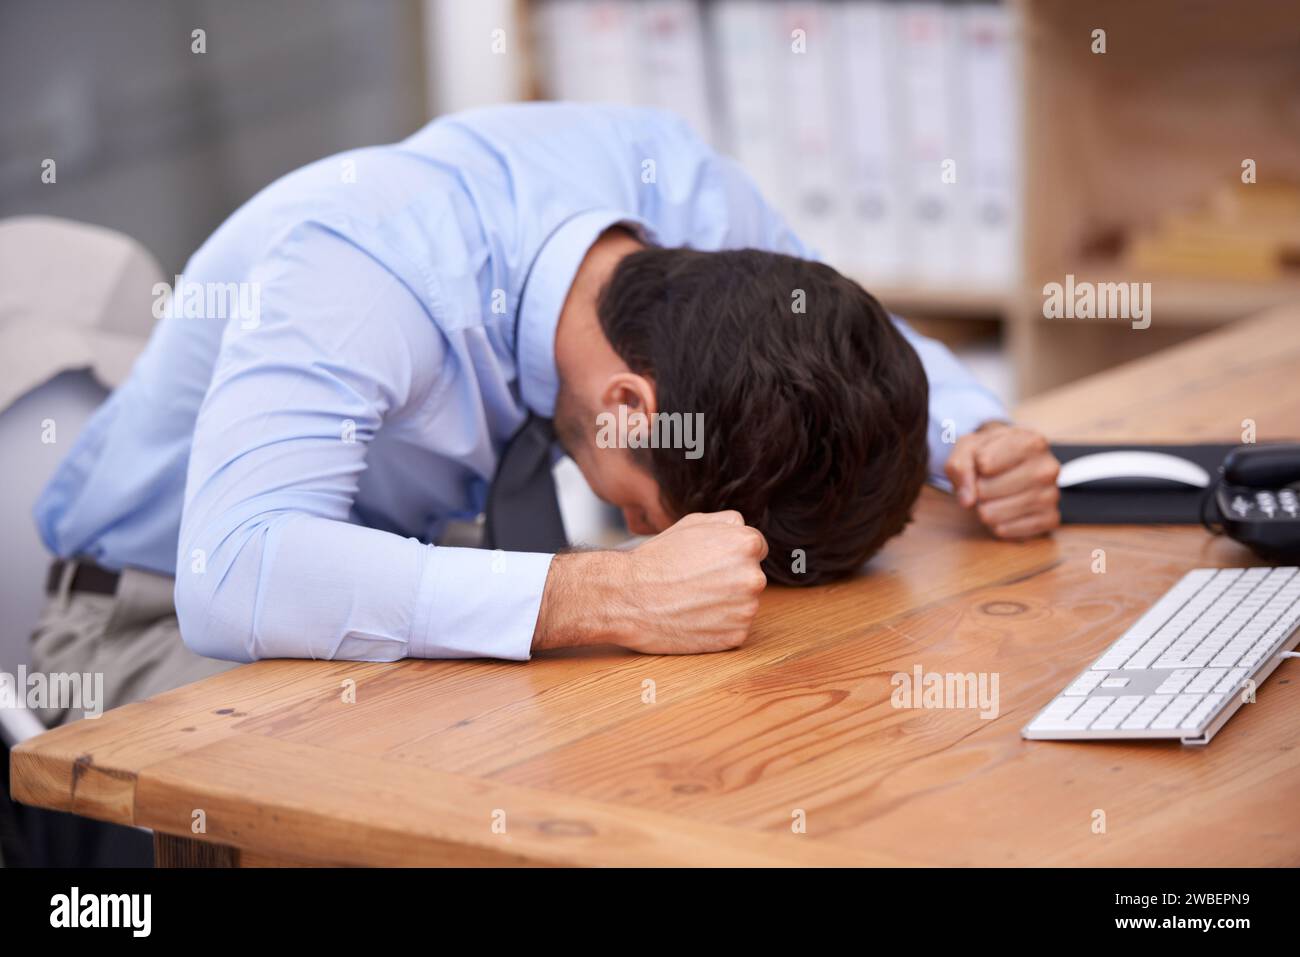 Business man, stress and resting on desk, burnout and mental health or overworked in workplace. Male professional, frustration and banging table in Stock Photo